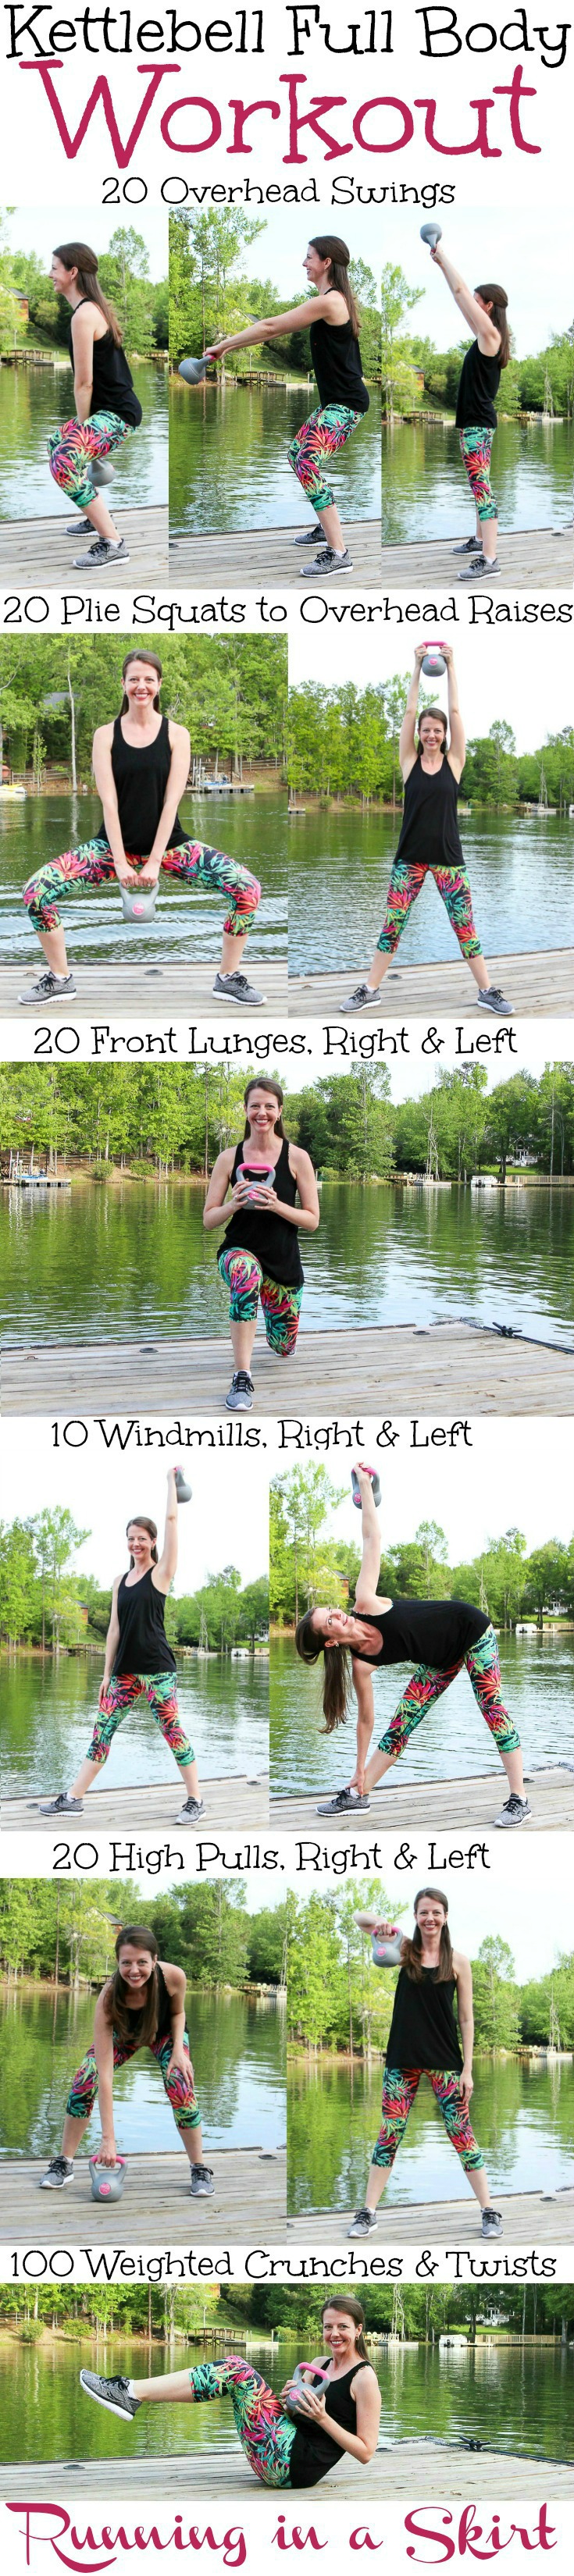 Kettlebell Full Body Workout at home details at Running in a Skirt / Running in a Skirt